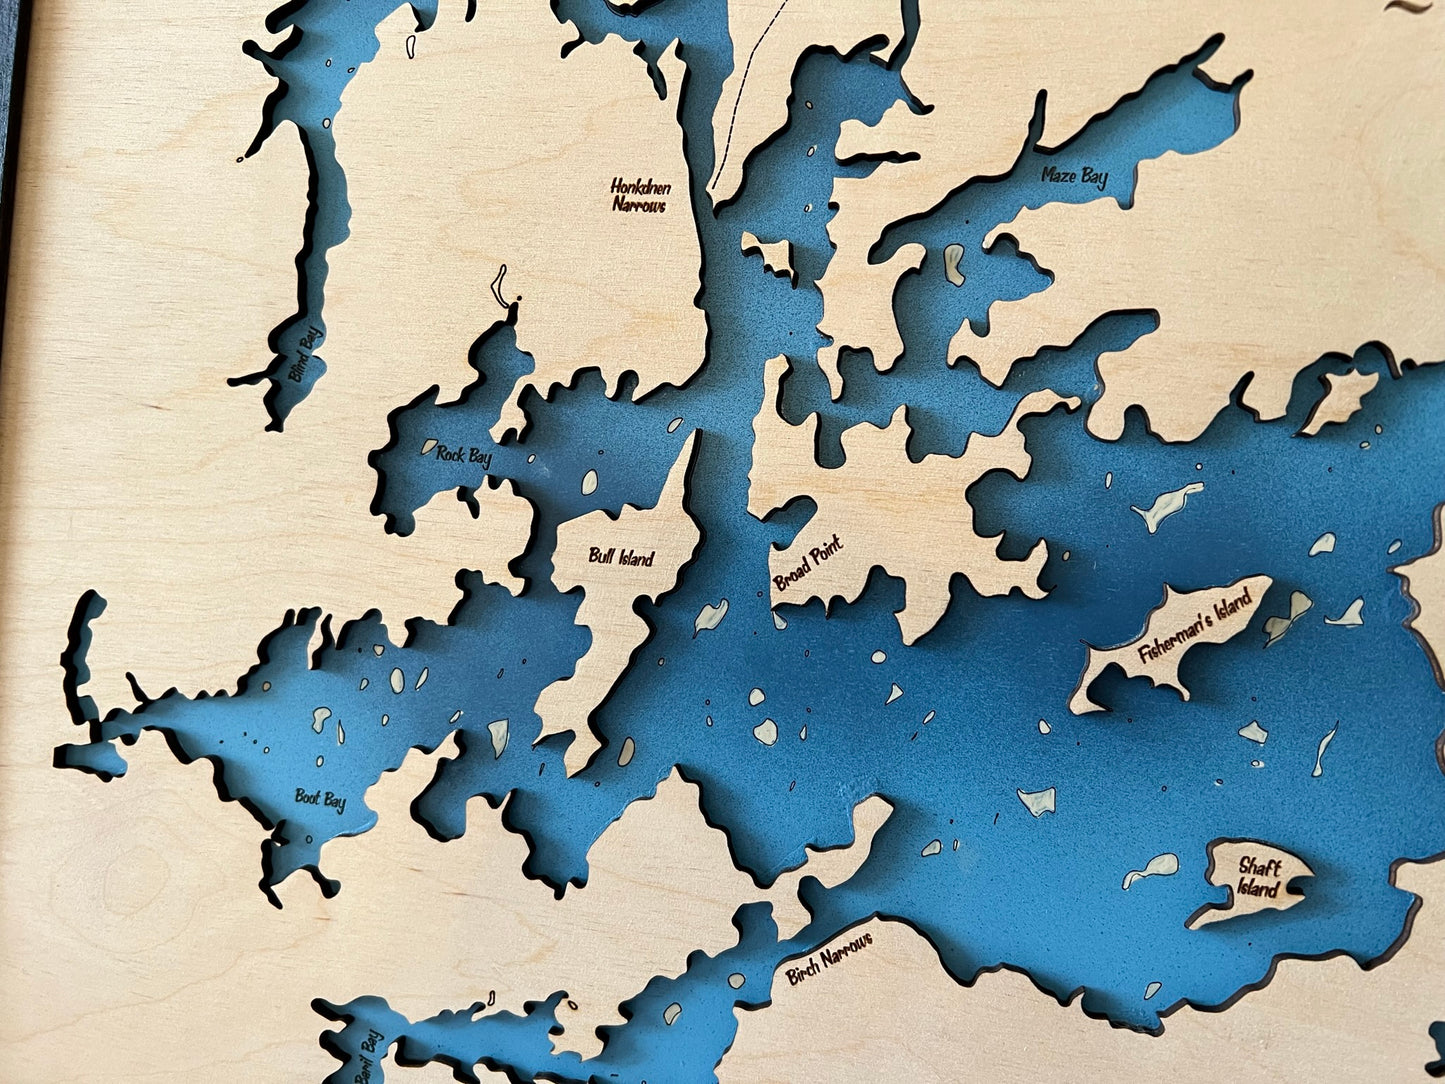 Layered Wood Engraved Map - Lac Des Mille Lacs